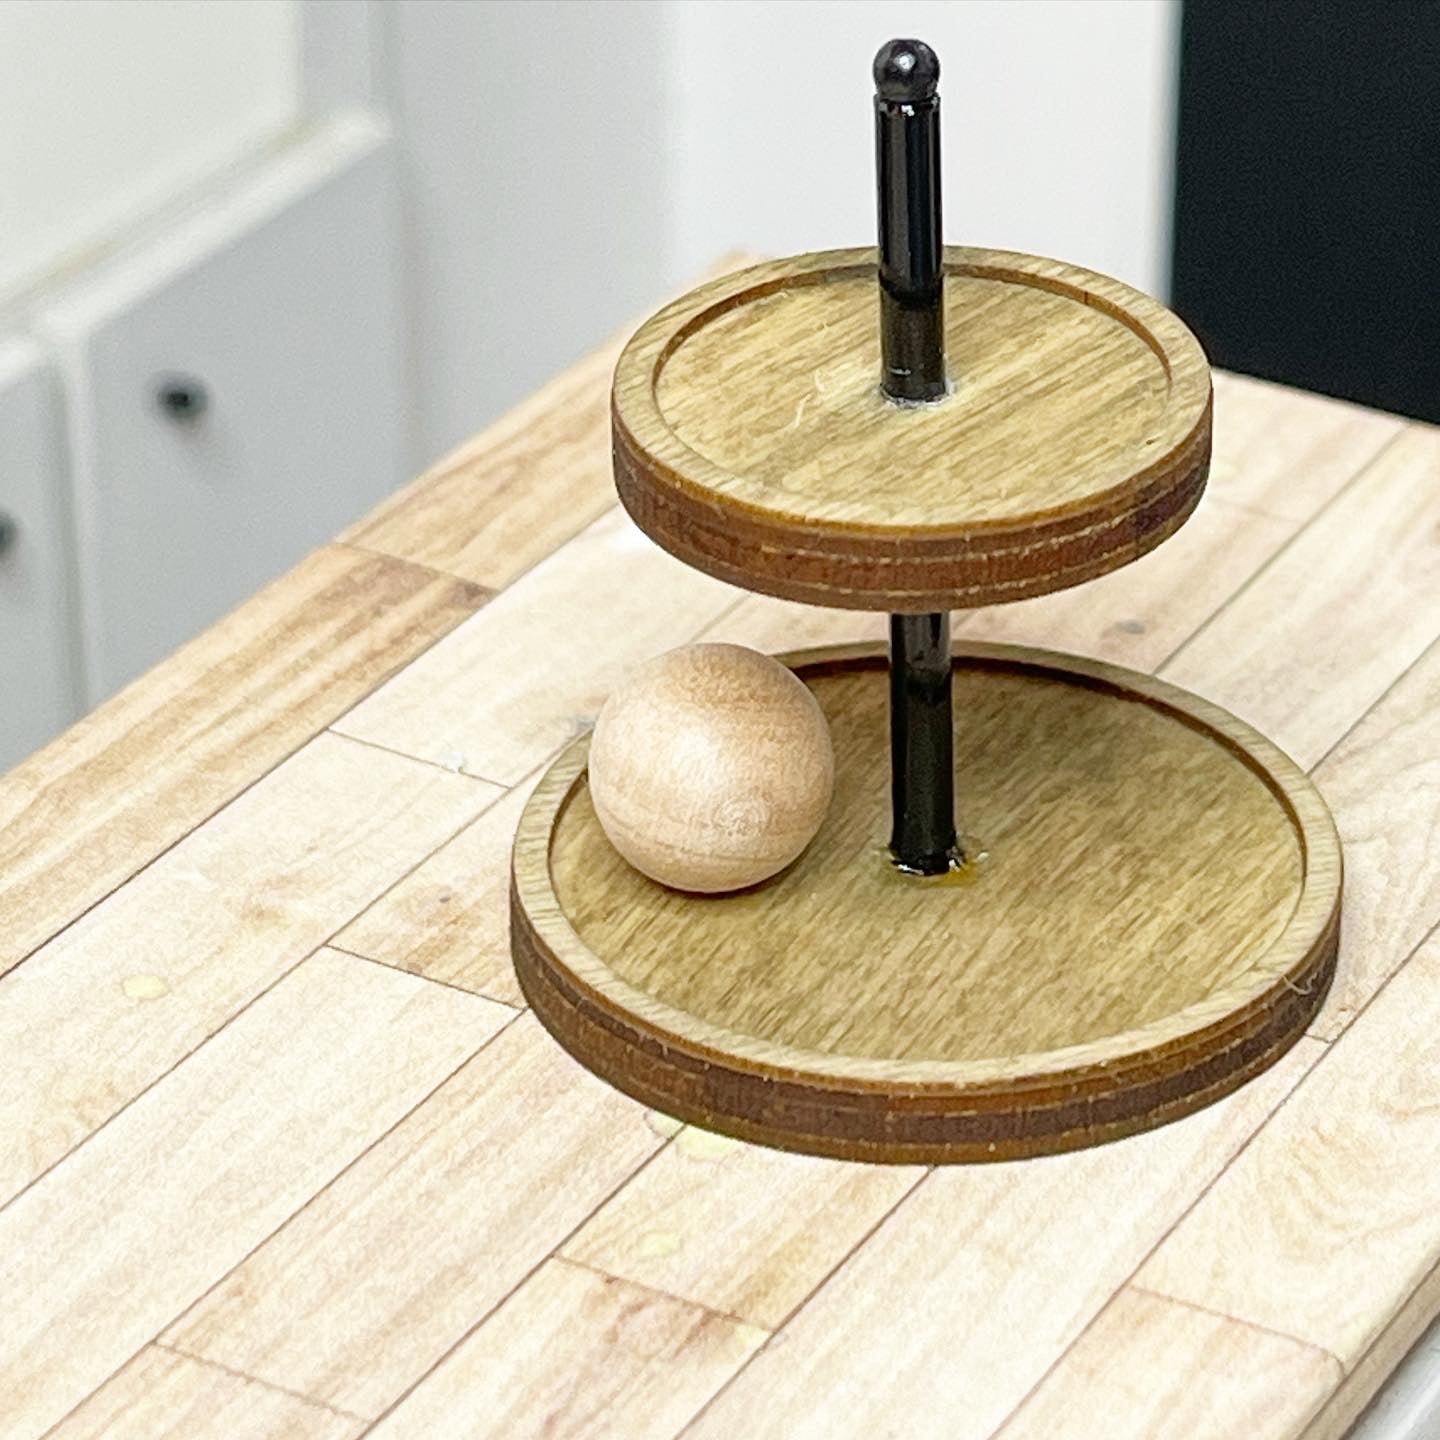 Wooden Ball for Decorative Tray